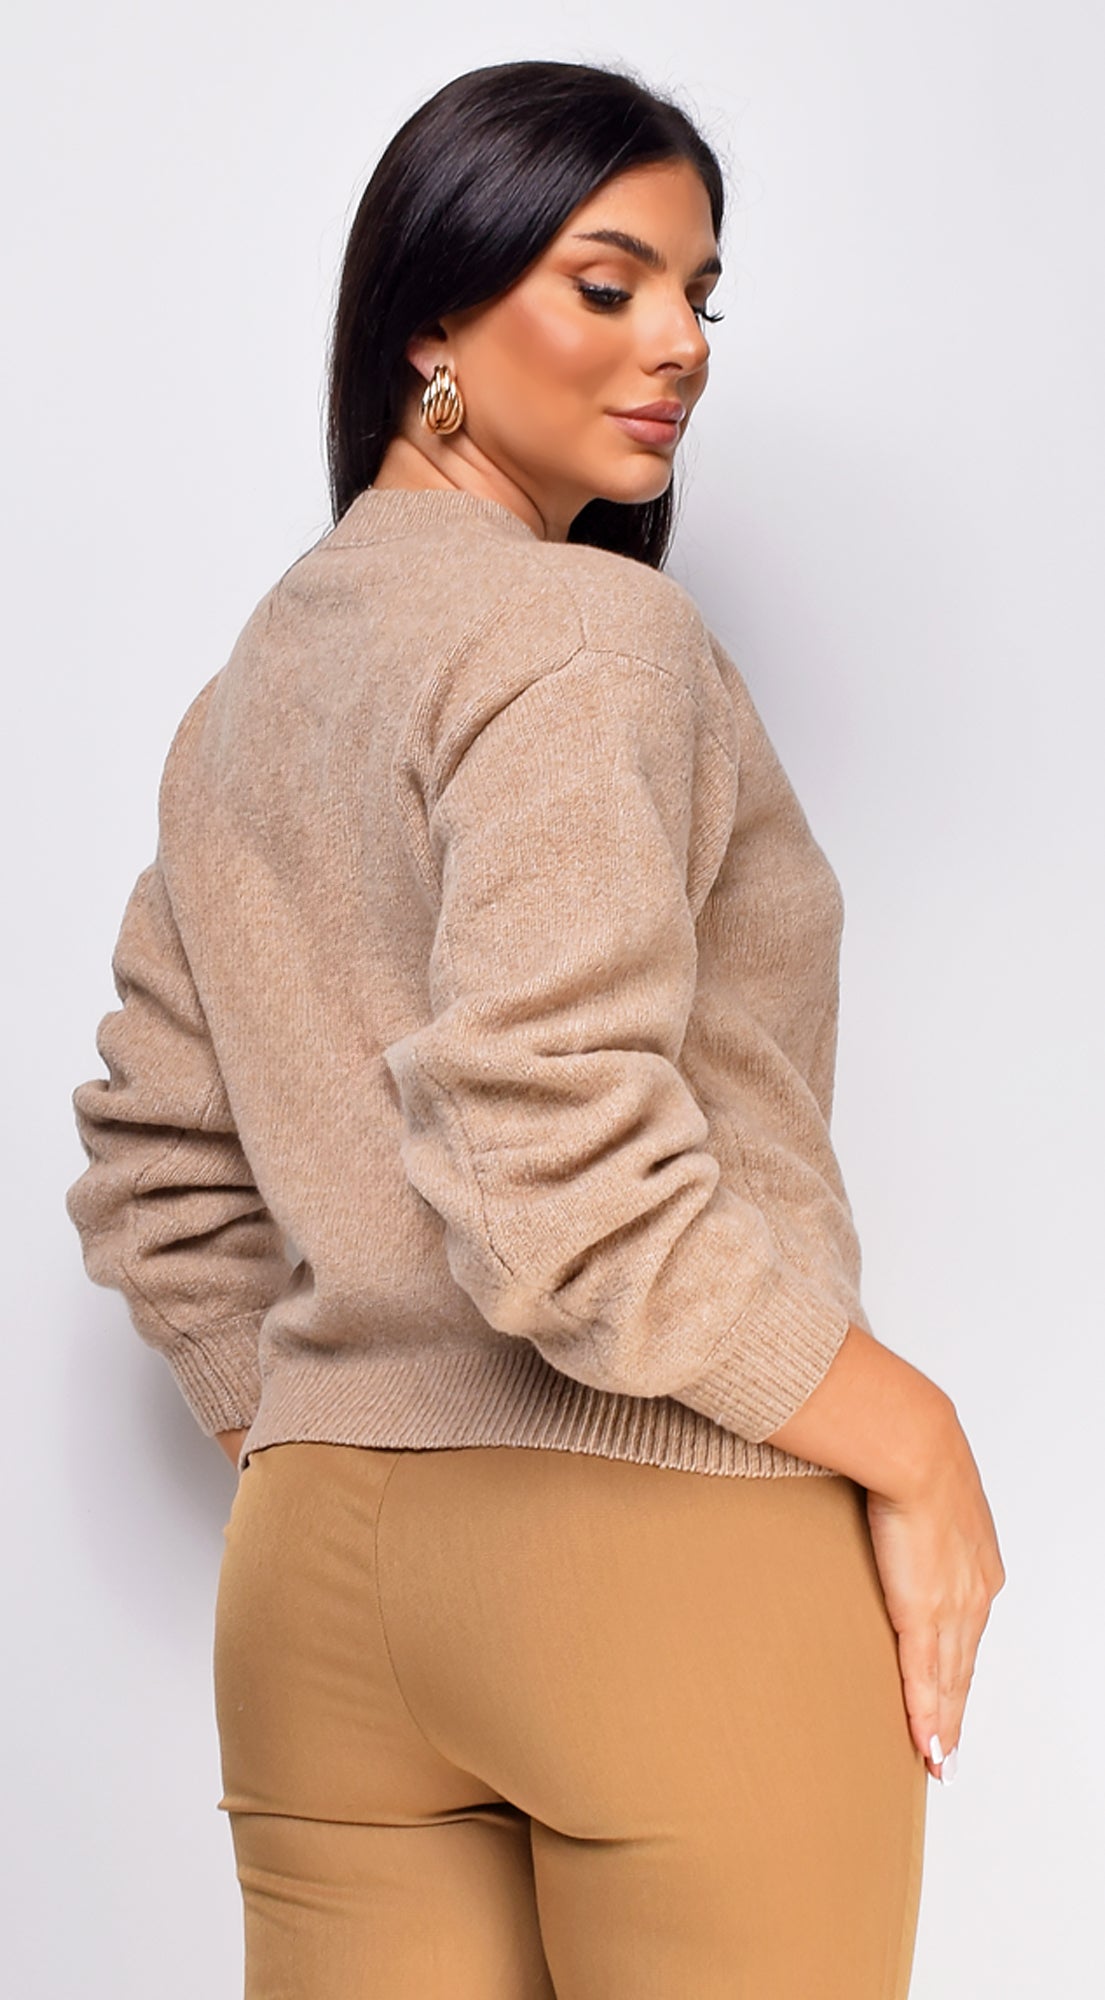 Jemmi Taupe Beige Pleated Detail Sweater Top